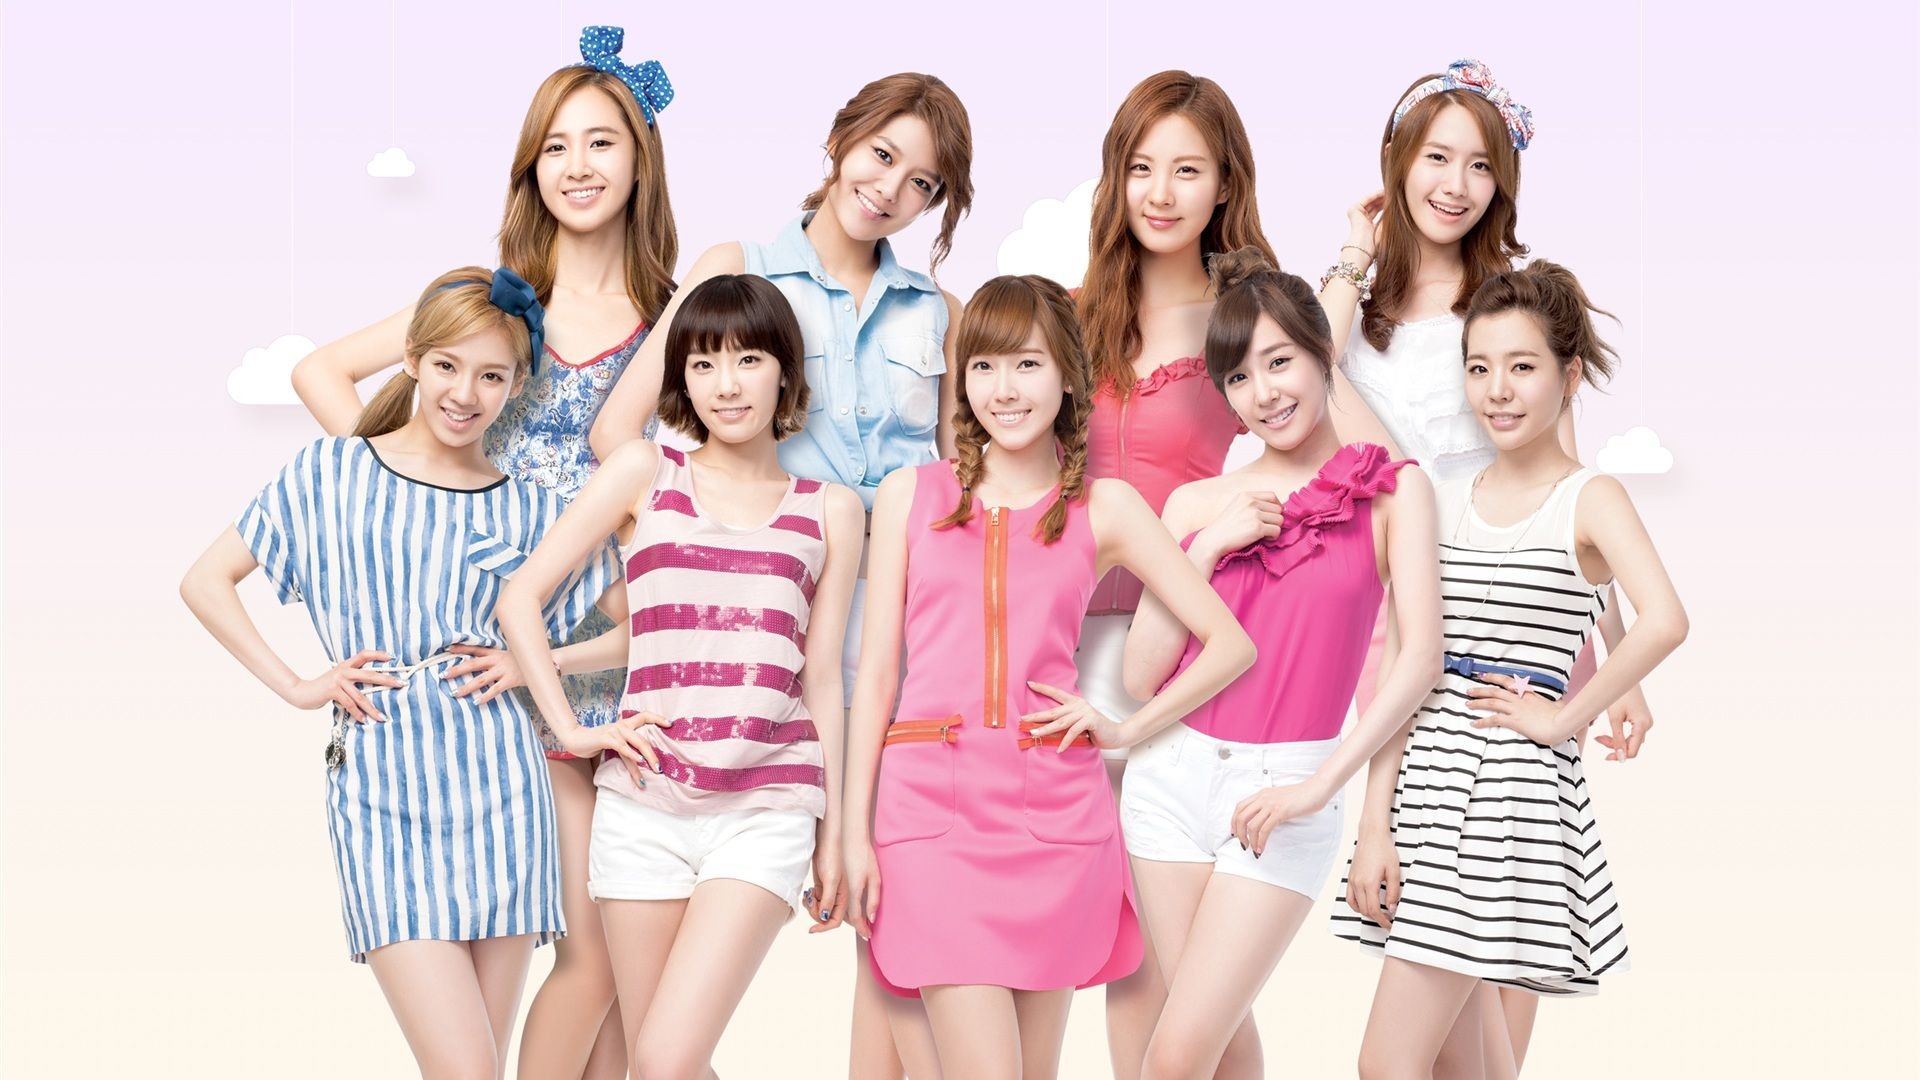 1920x1080 Dont miss SNSD Love and Smile HD Dekstop Wallpaper HD Wallpaper. Get all of  SNSD Exclusive dekstop background collections.